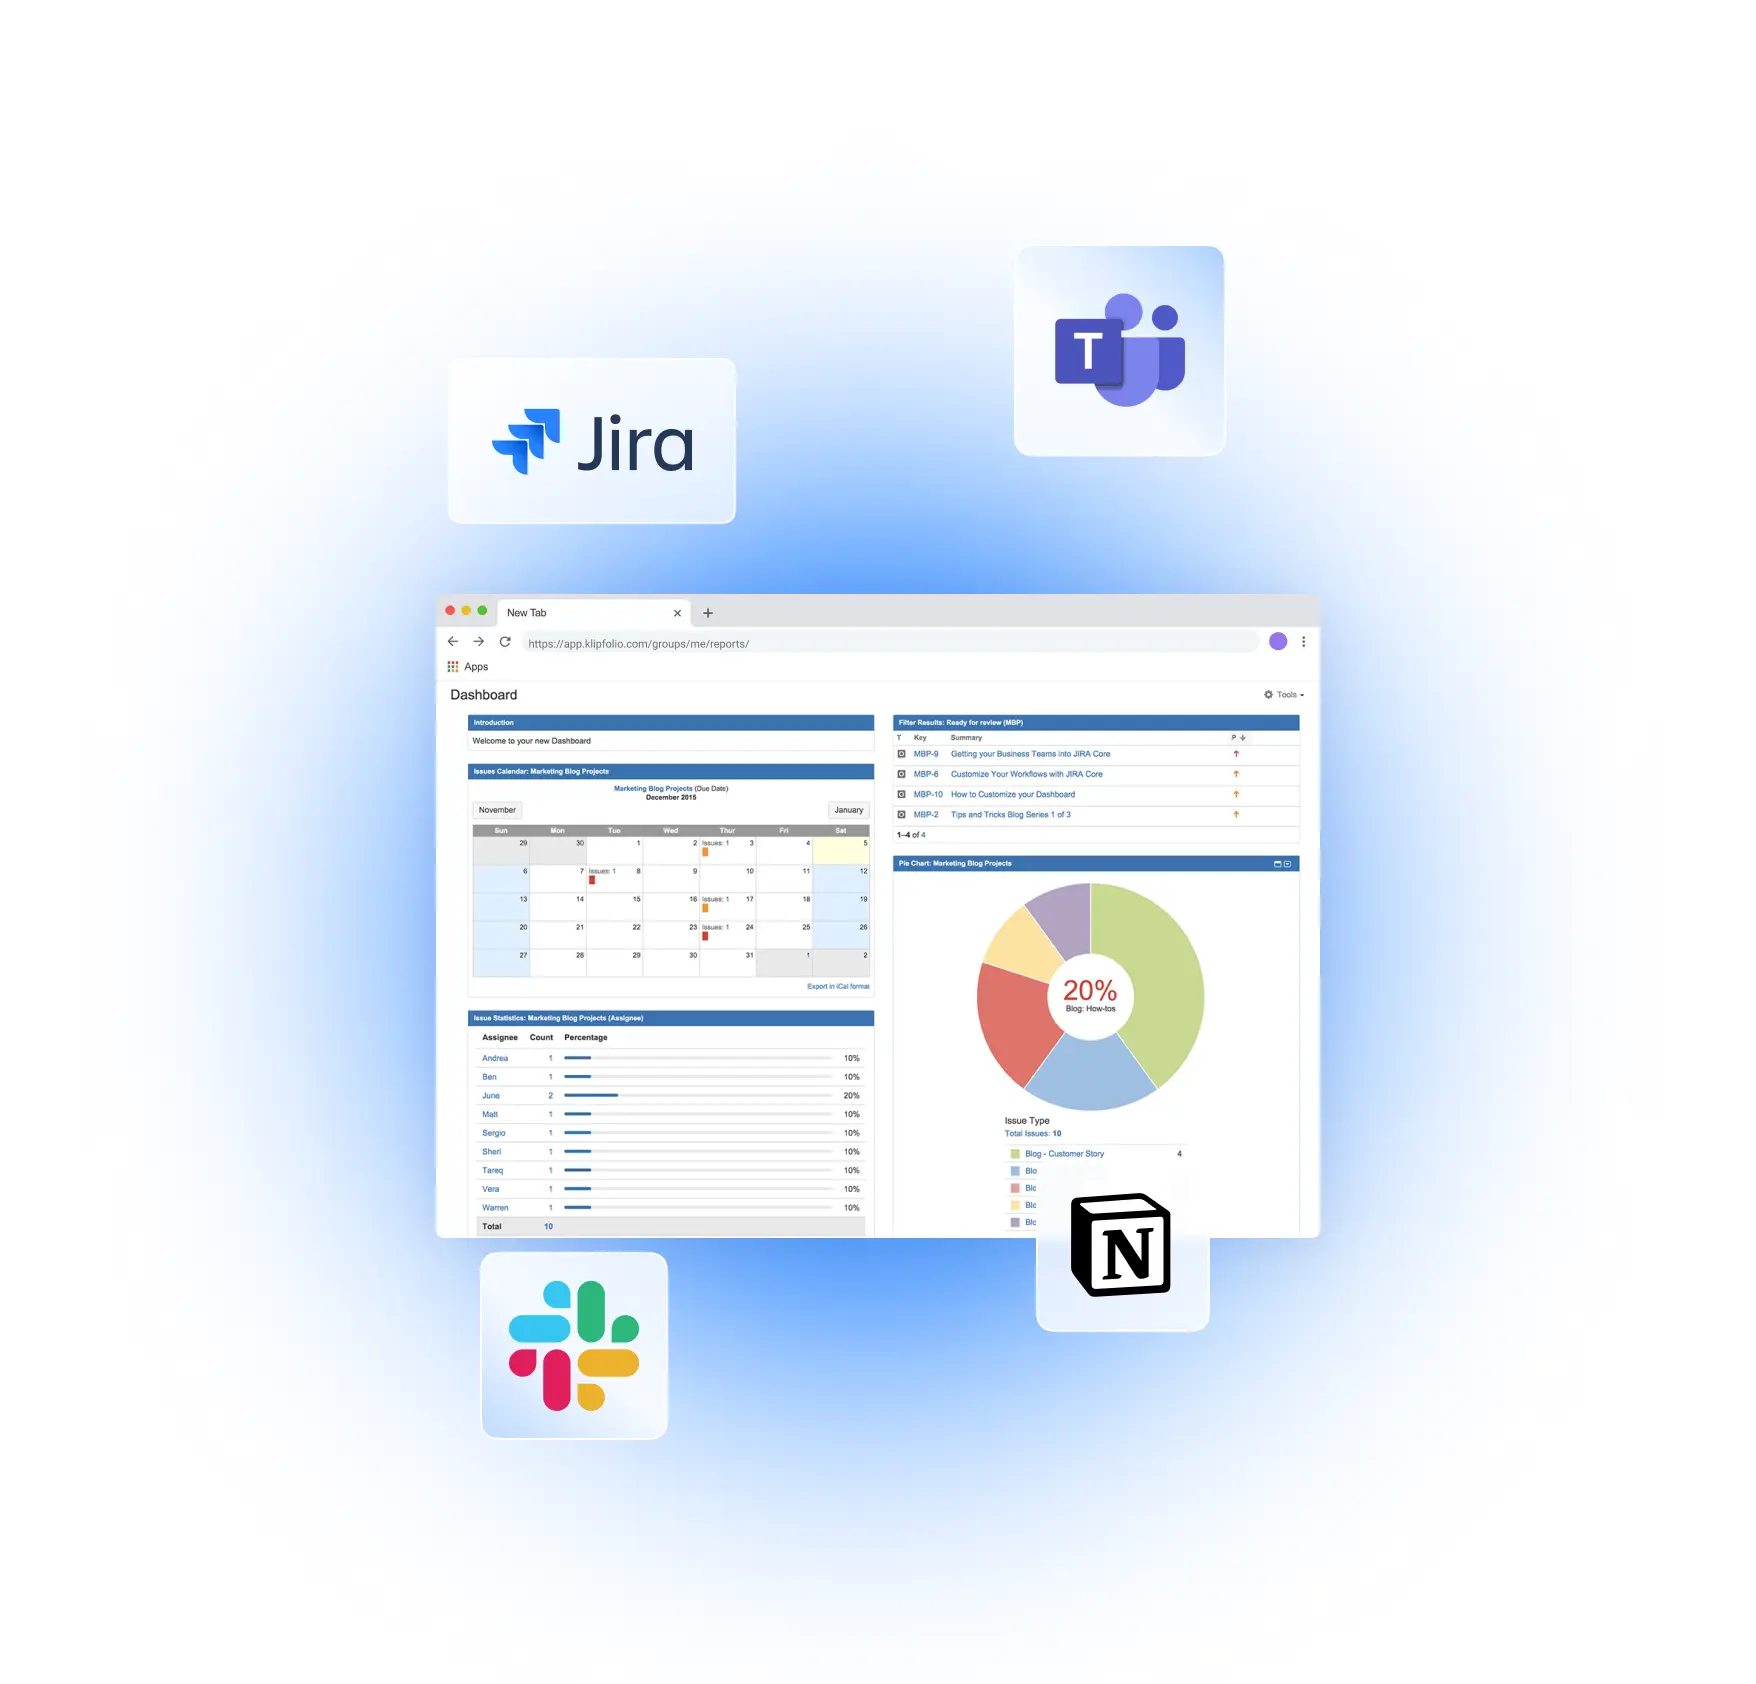 A Jira dashboard is open in a browser tab